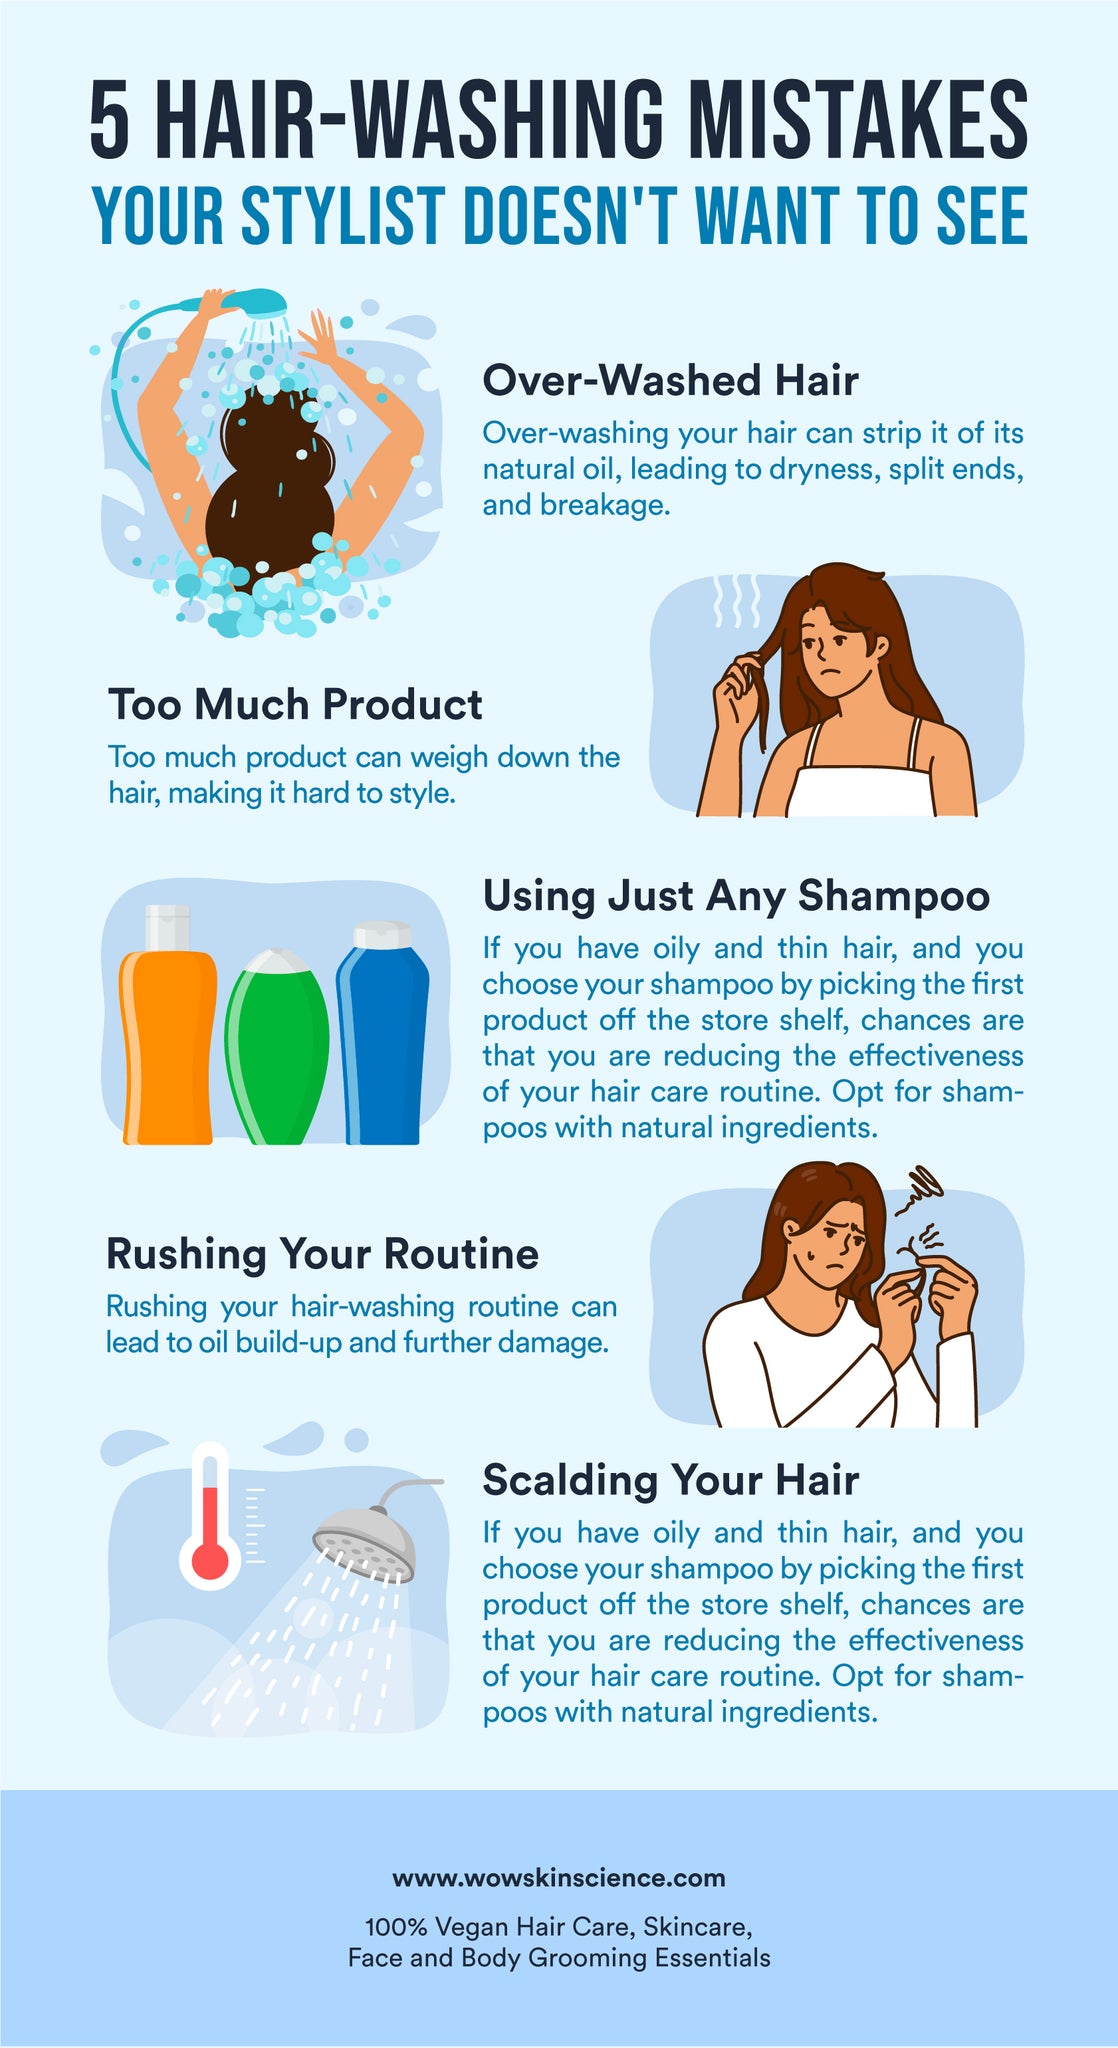 How to Care for Oily Thin Hair